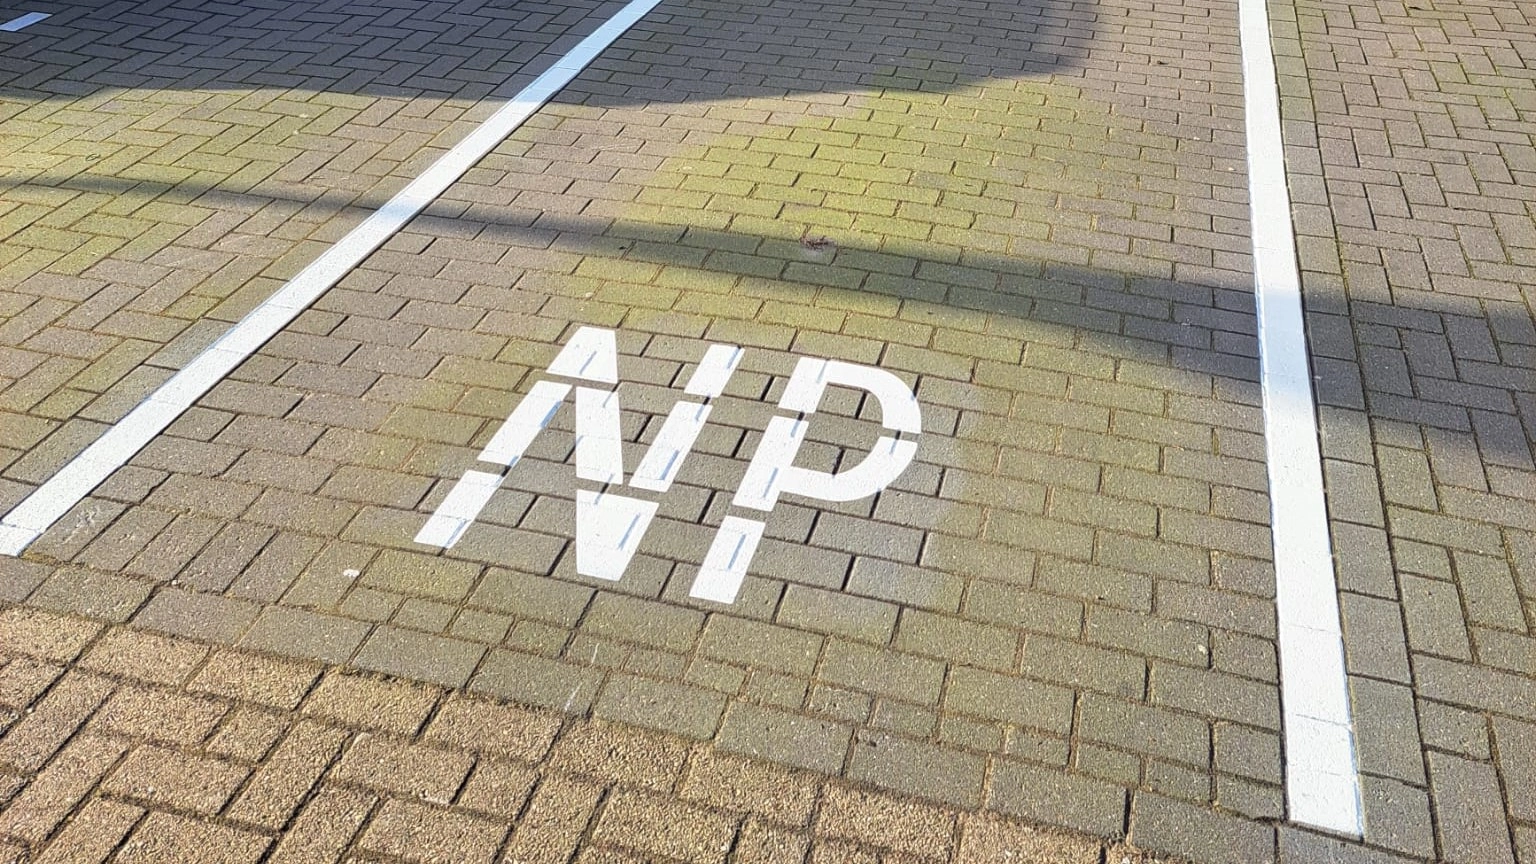 Niet parkeren wegmarkering - Niet parkeren wegmarking np markering